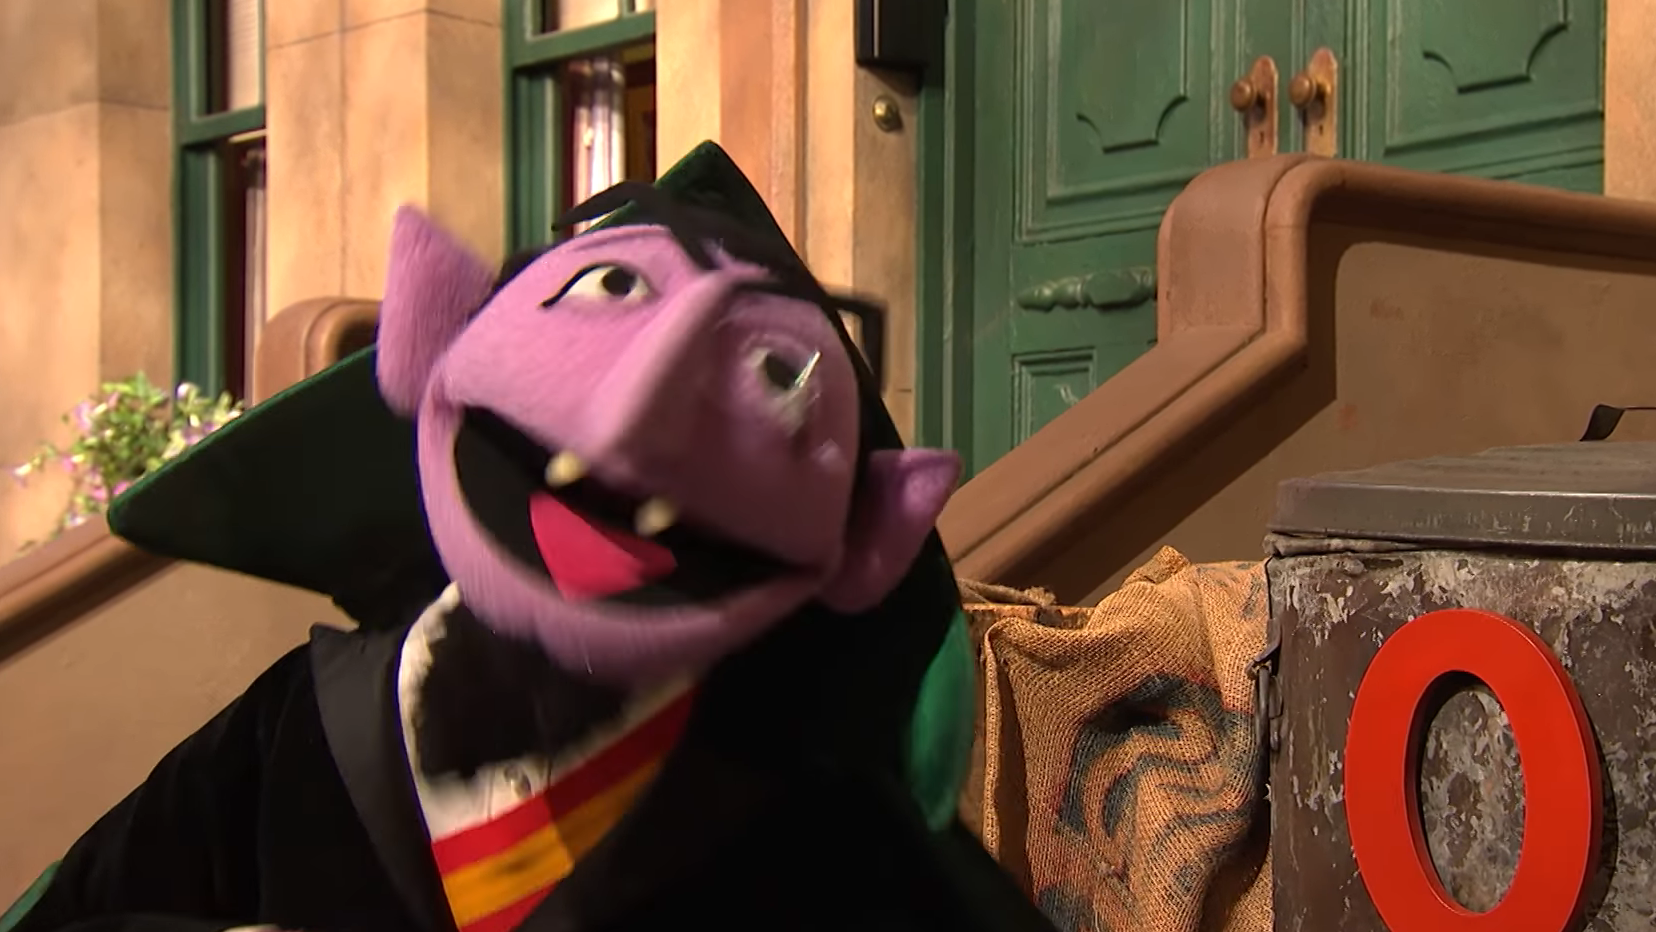 A puppet from a popular children's TV show with purple skin, a monocle, and a cape